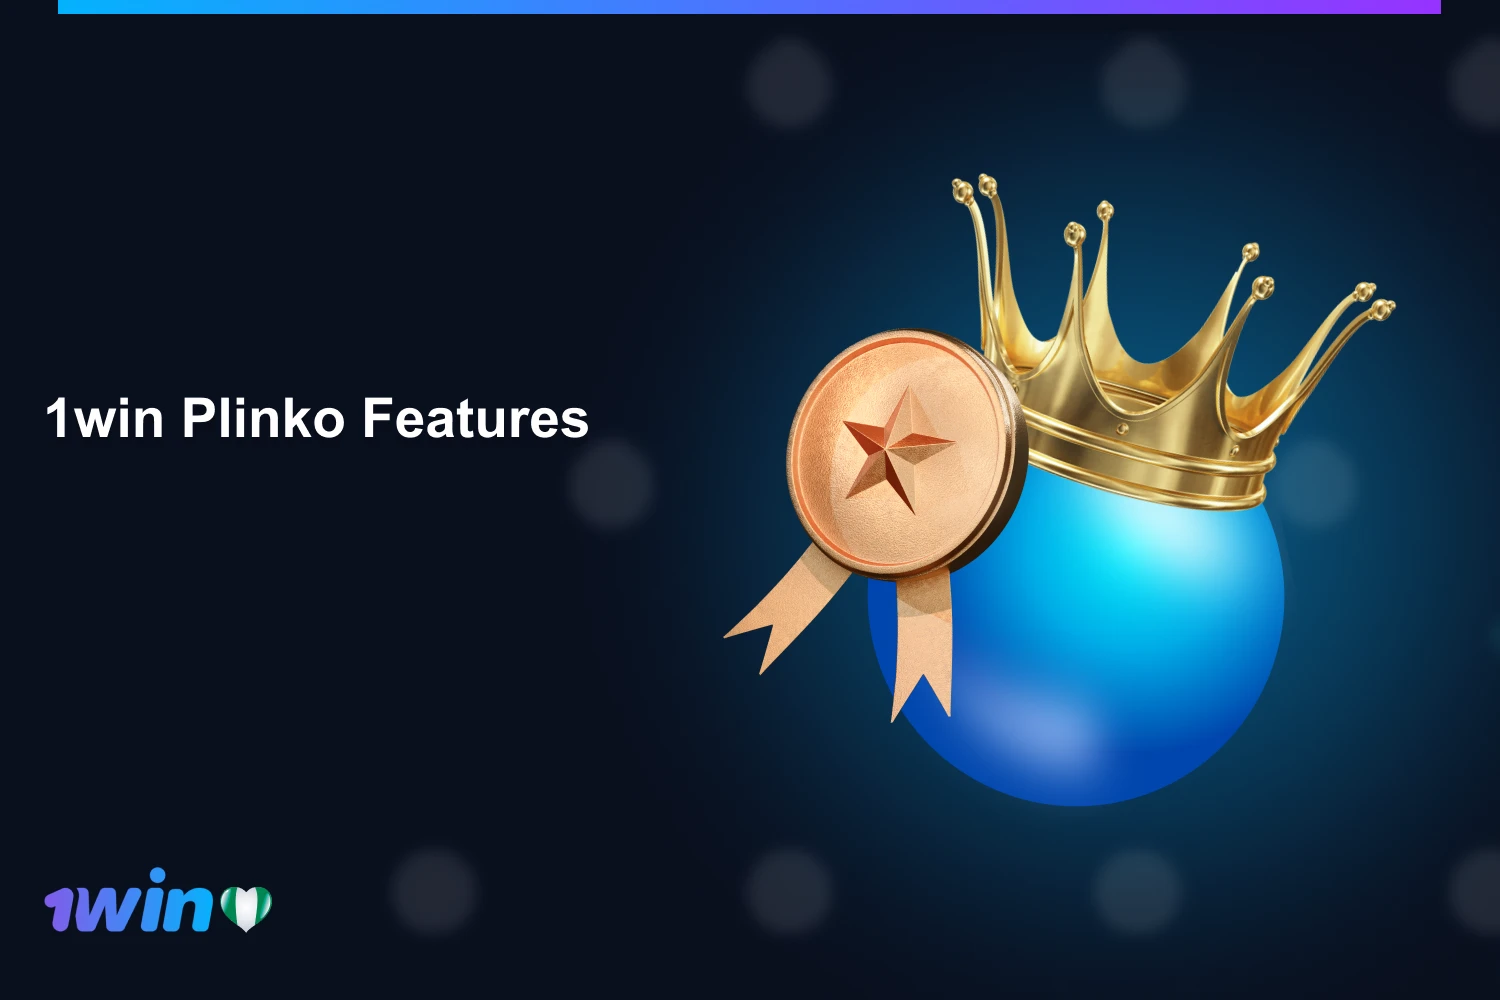 Nigerians prefer 1win Plinko due to its simple interface and interesting features